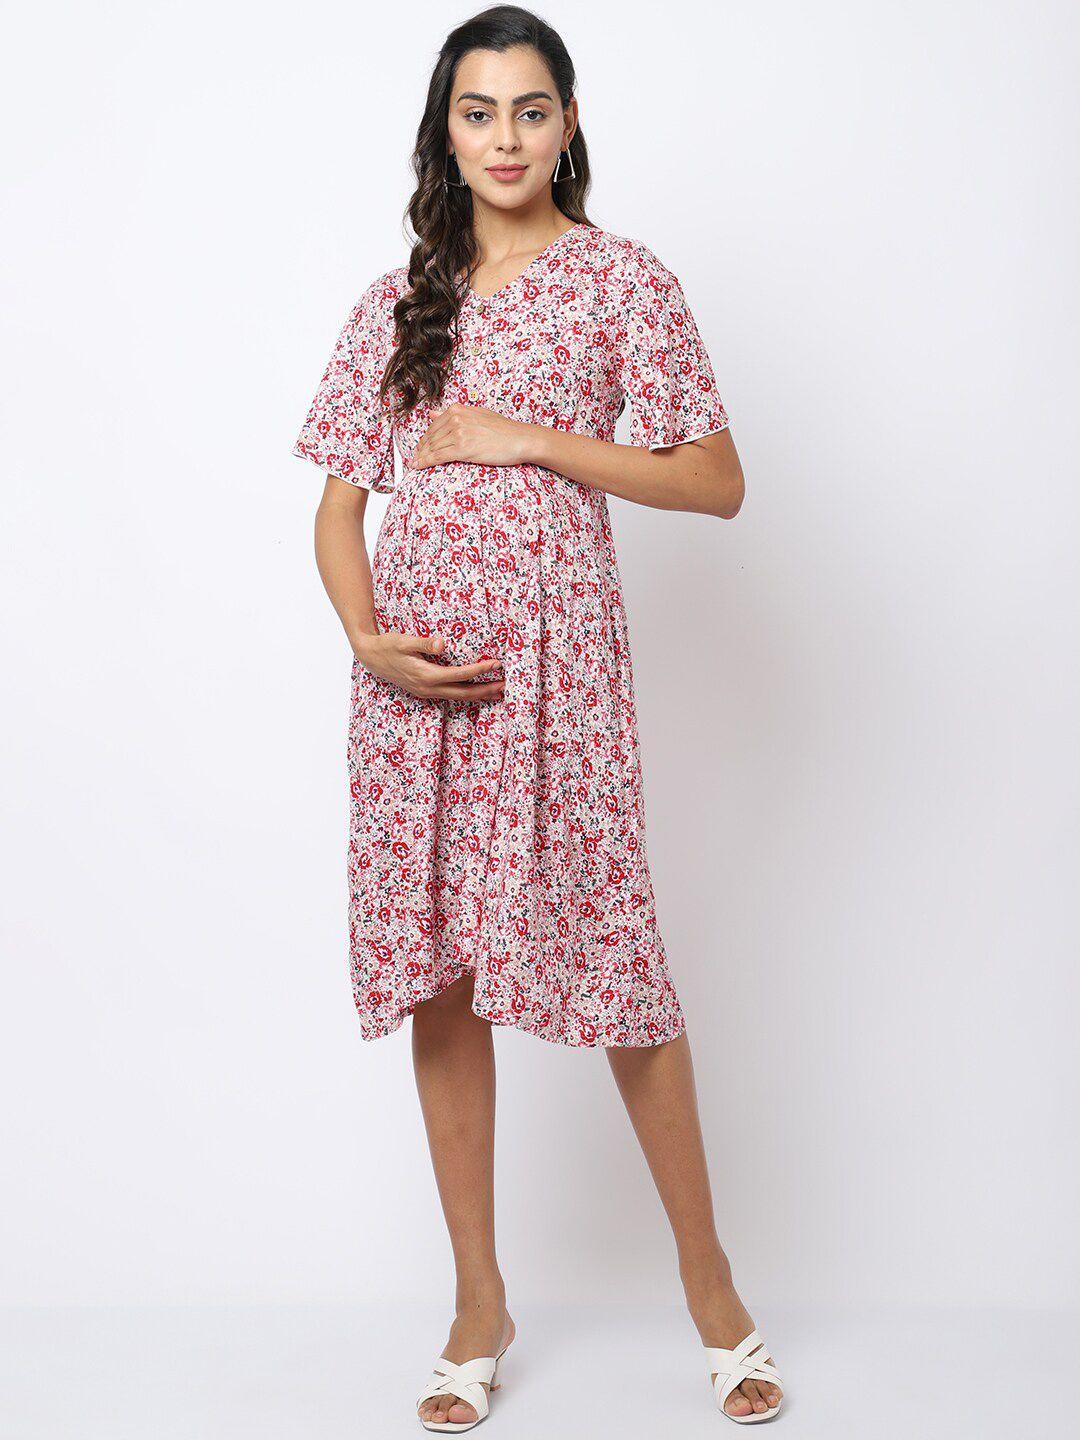 frempy red & white floral maternity a-line dress